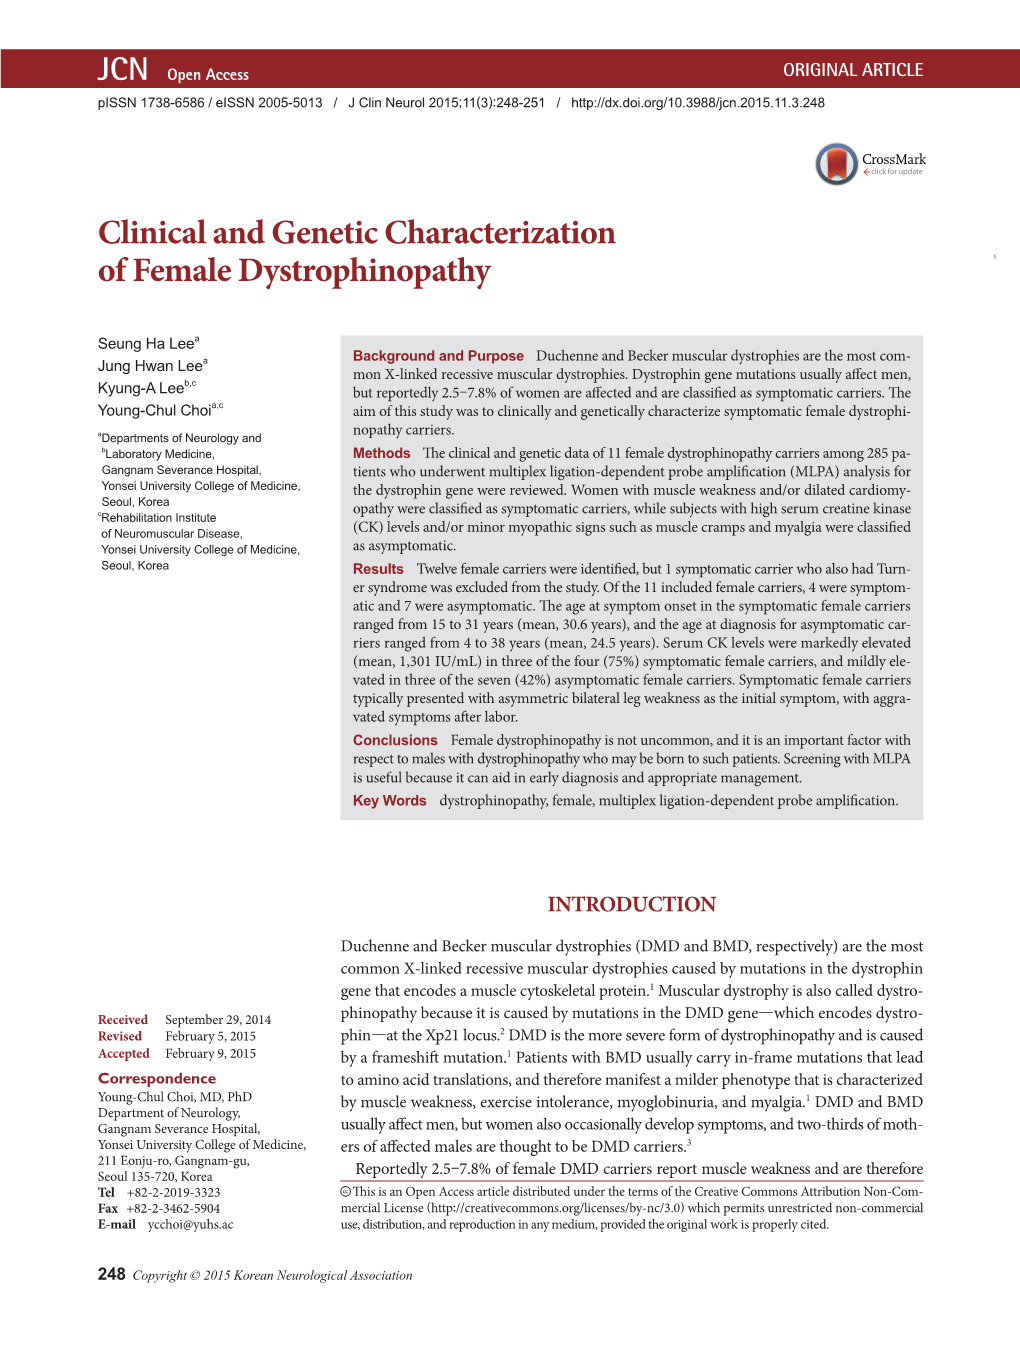 Clinical and Genetic Characterization of Female Dystrophinopathy